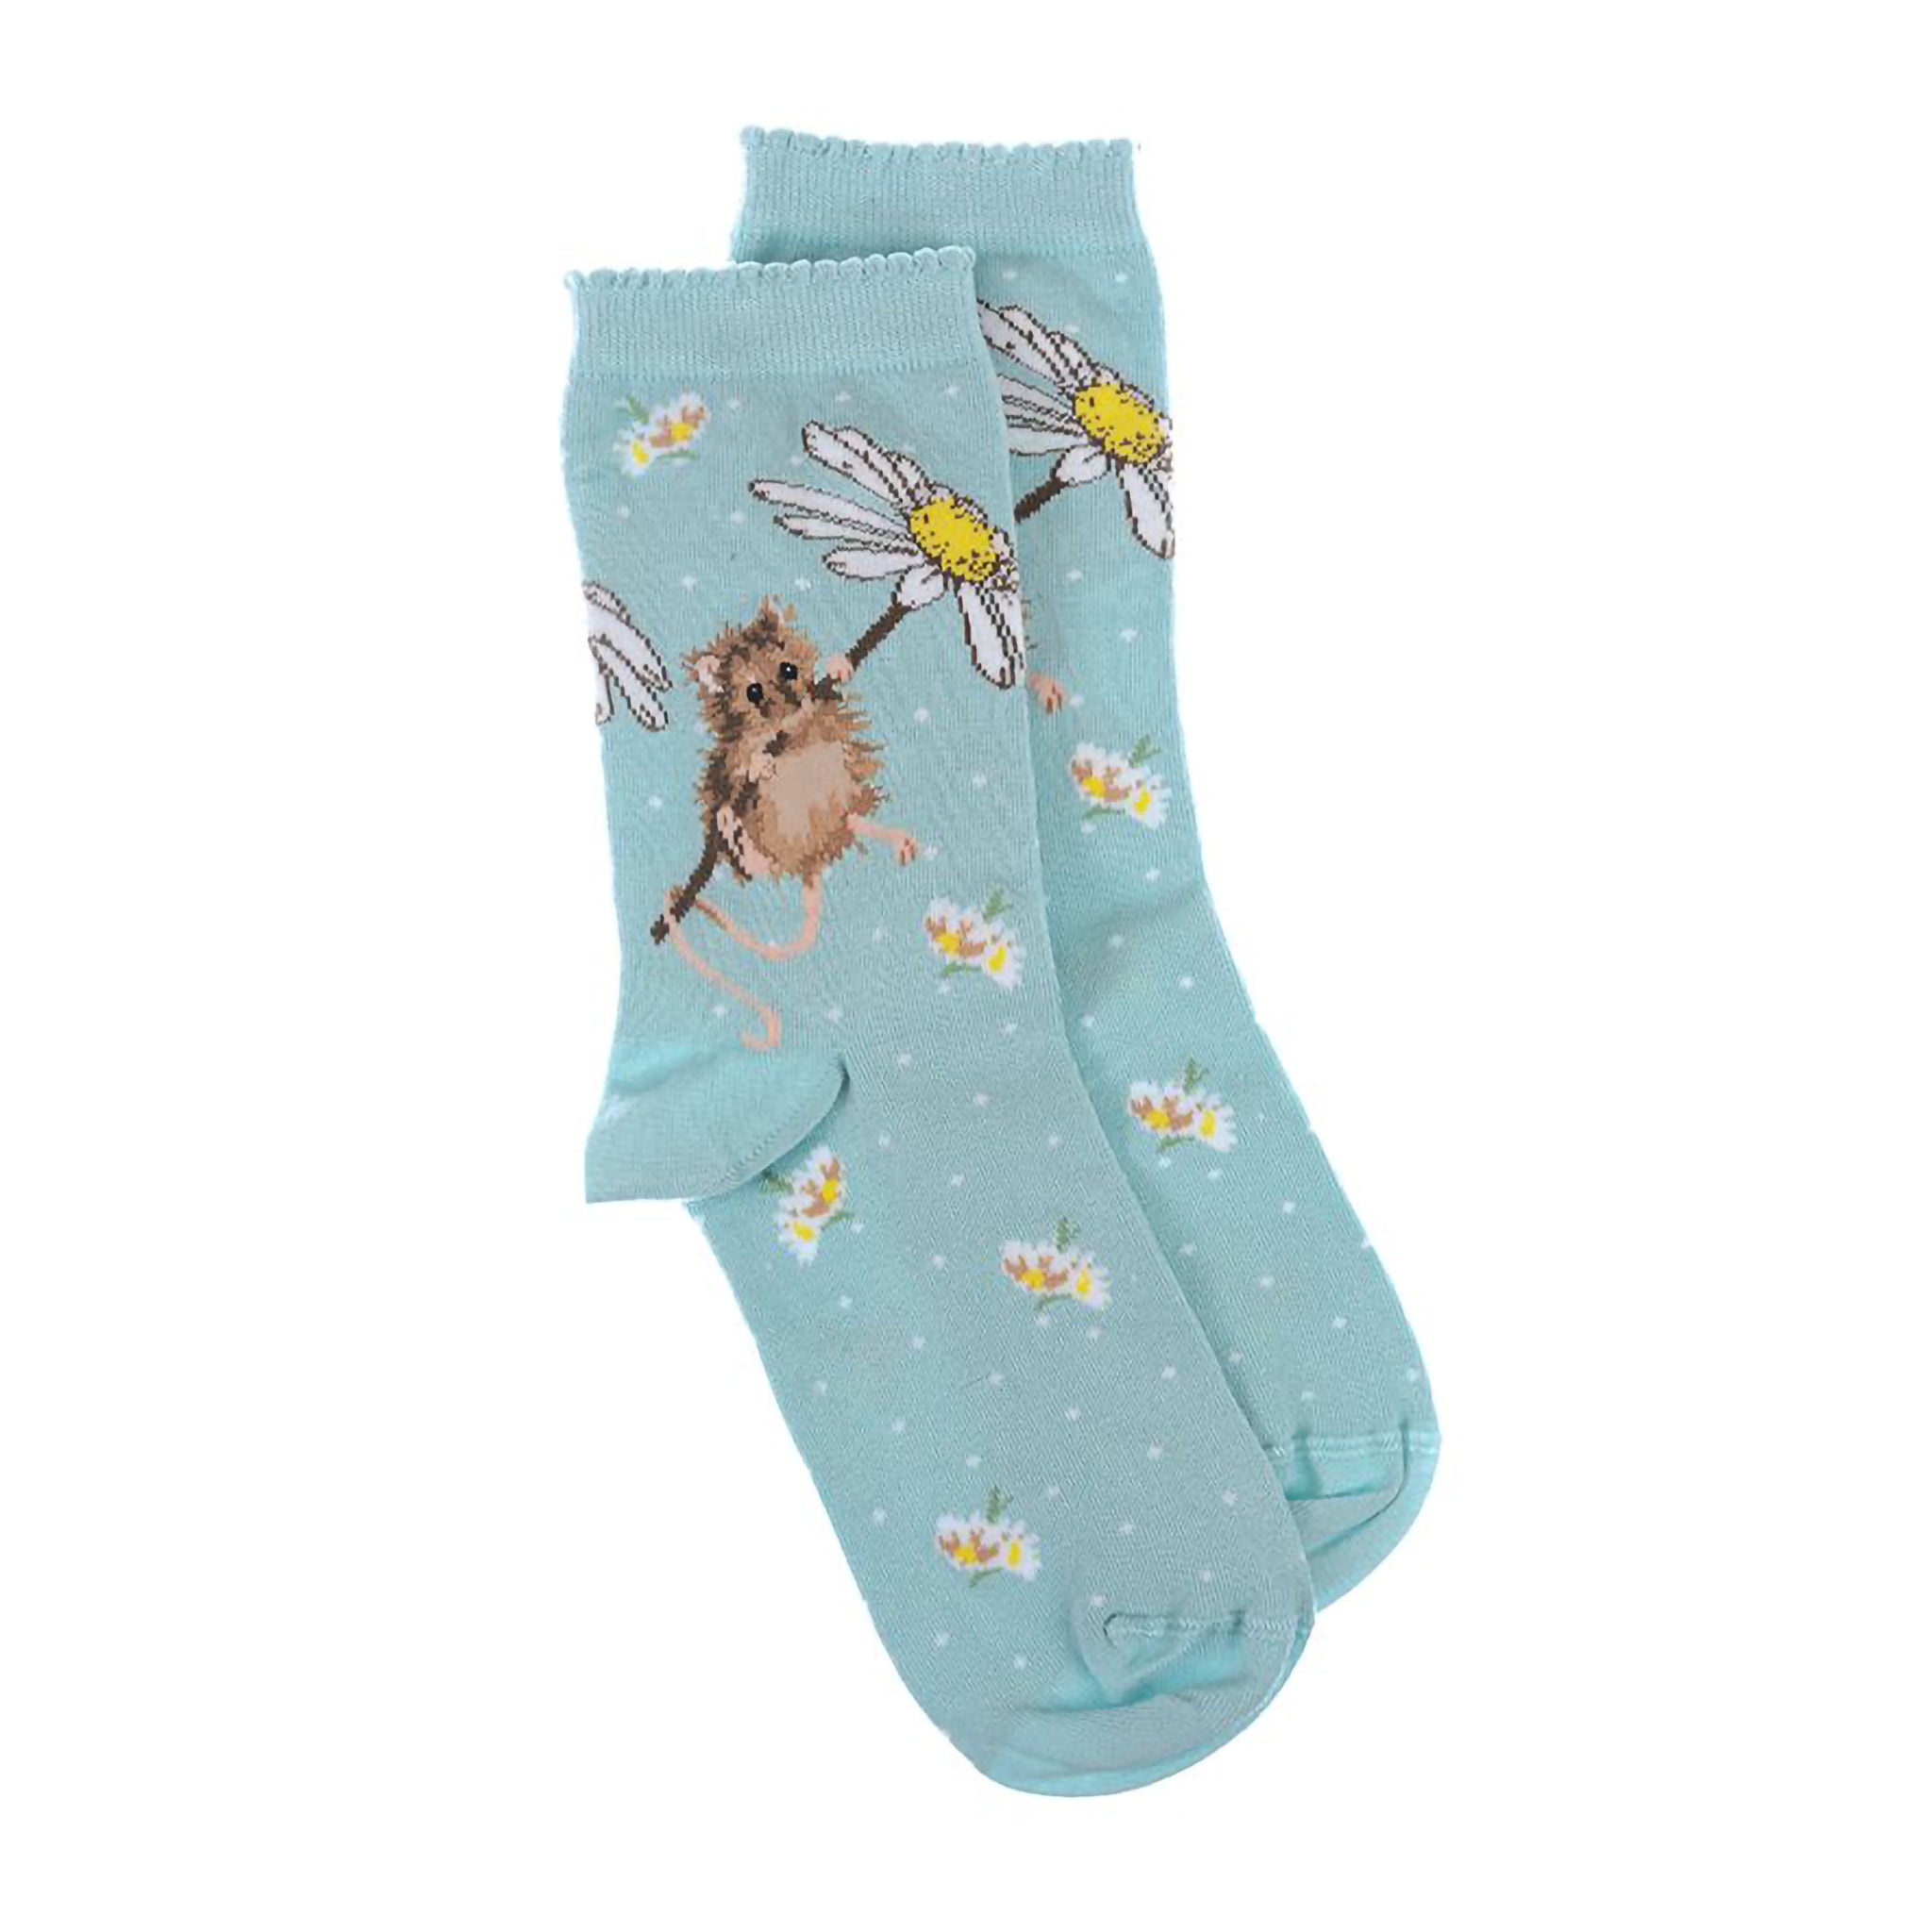 A pair of light blue socks with a mouse holding a daisy picture and white polka dots